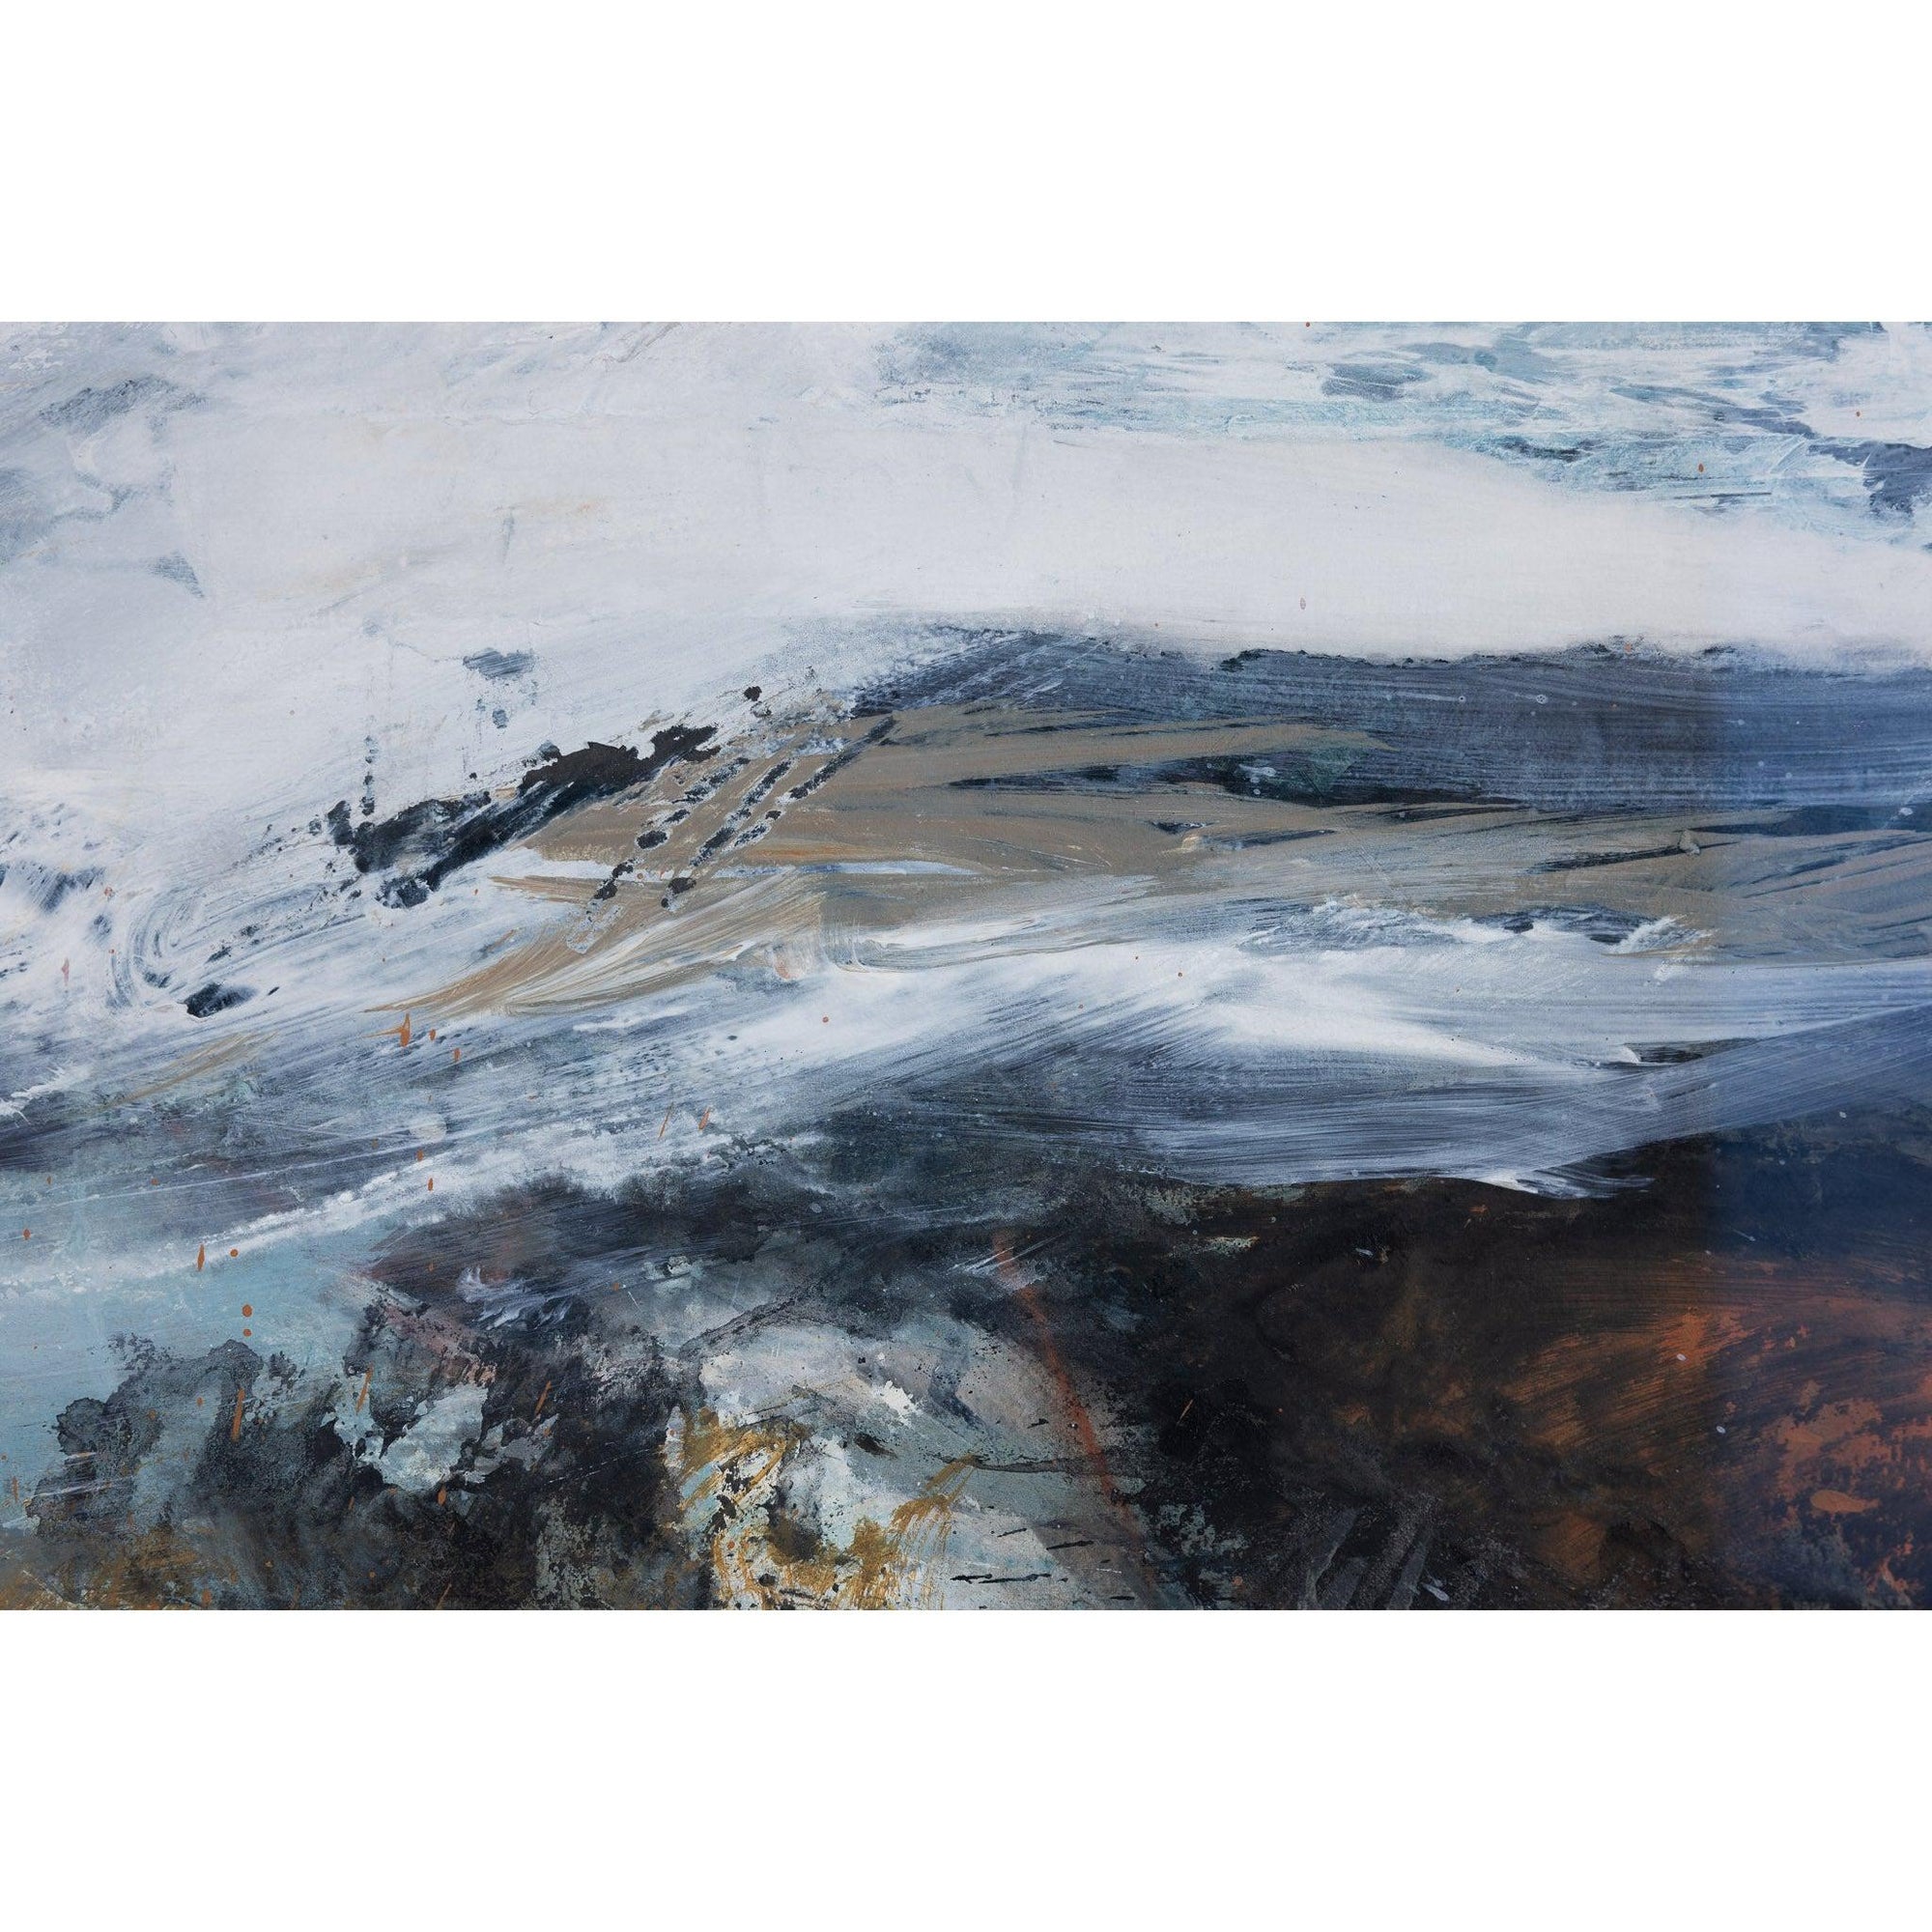 'Onrushing Tide' mixed media original by Jo Ellis, available at Padstow Gallery, Cornwall